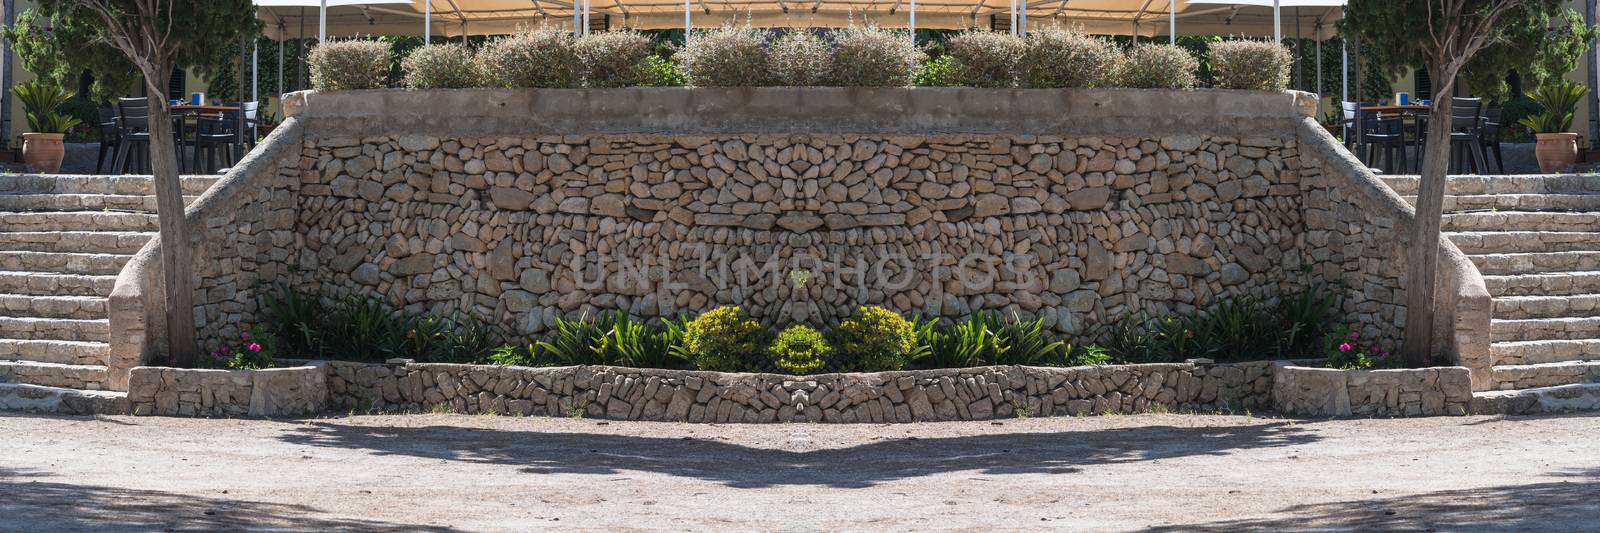 Mediterranean Retaining wall made of natural stones by JFsPic